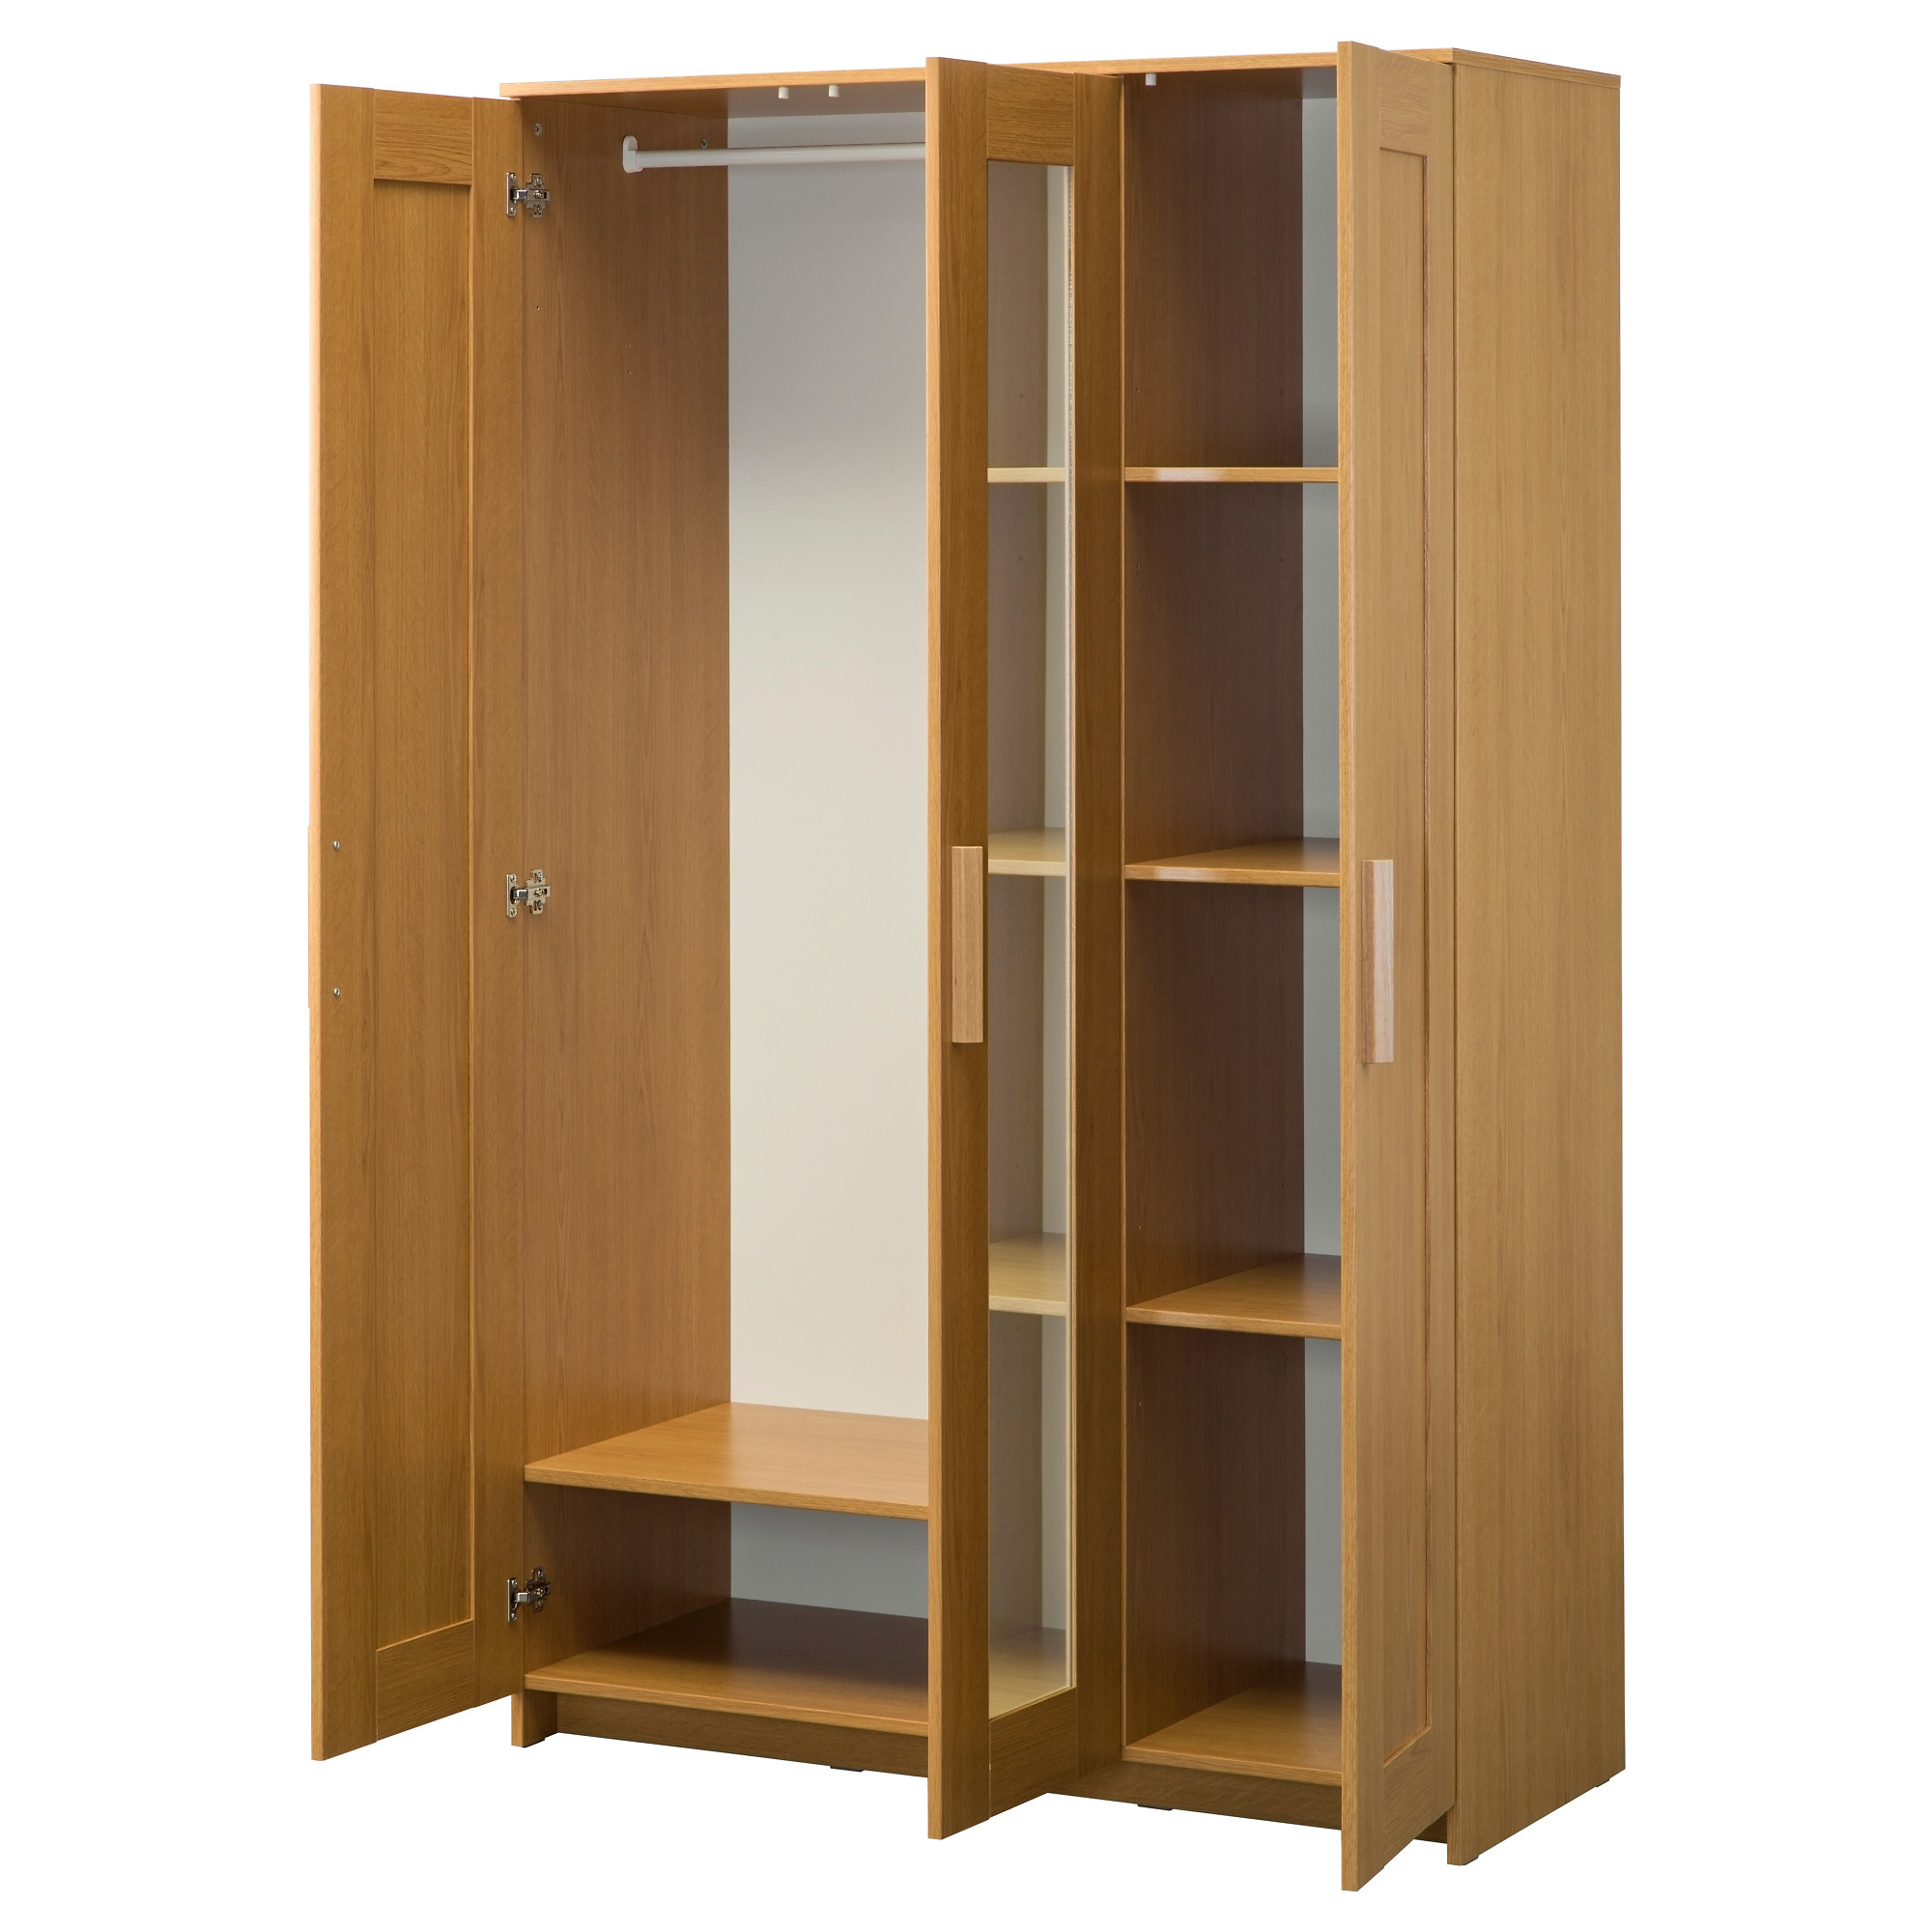 ikea brimnes wardrobe with 3 doors oak effect 117x190 cm the mirror door can be placed on the left side right side or in the middle